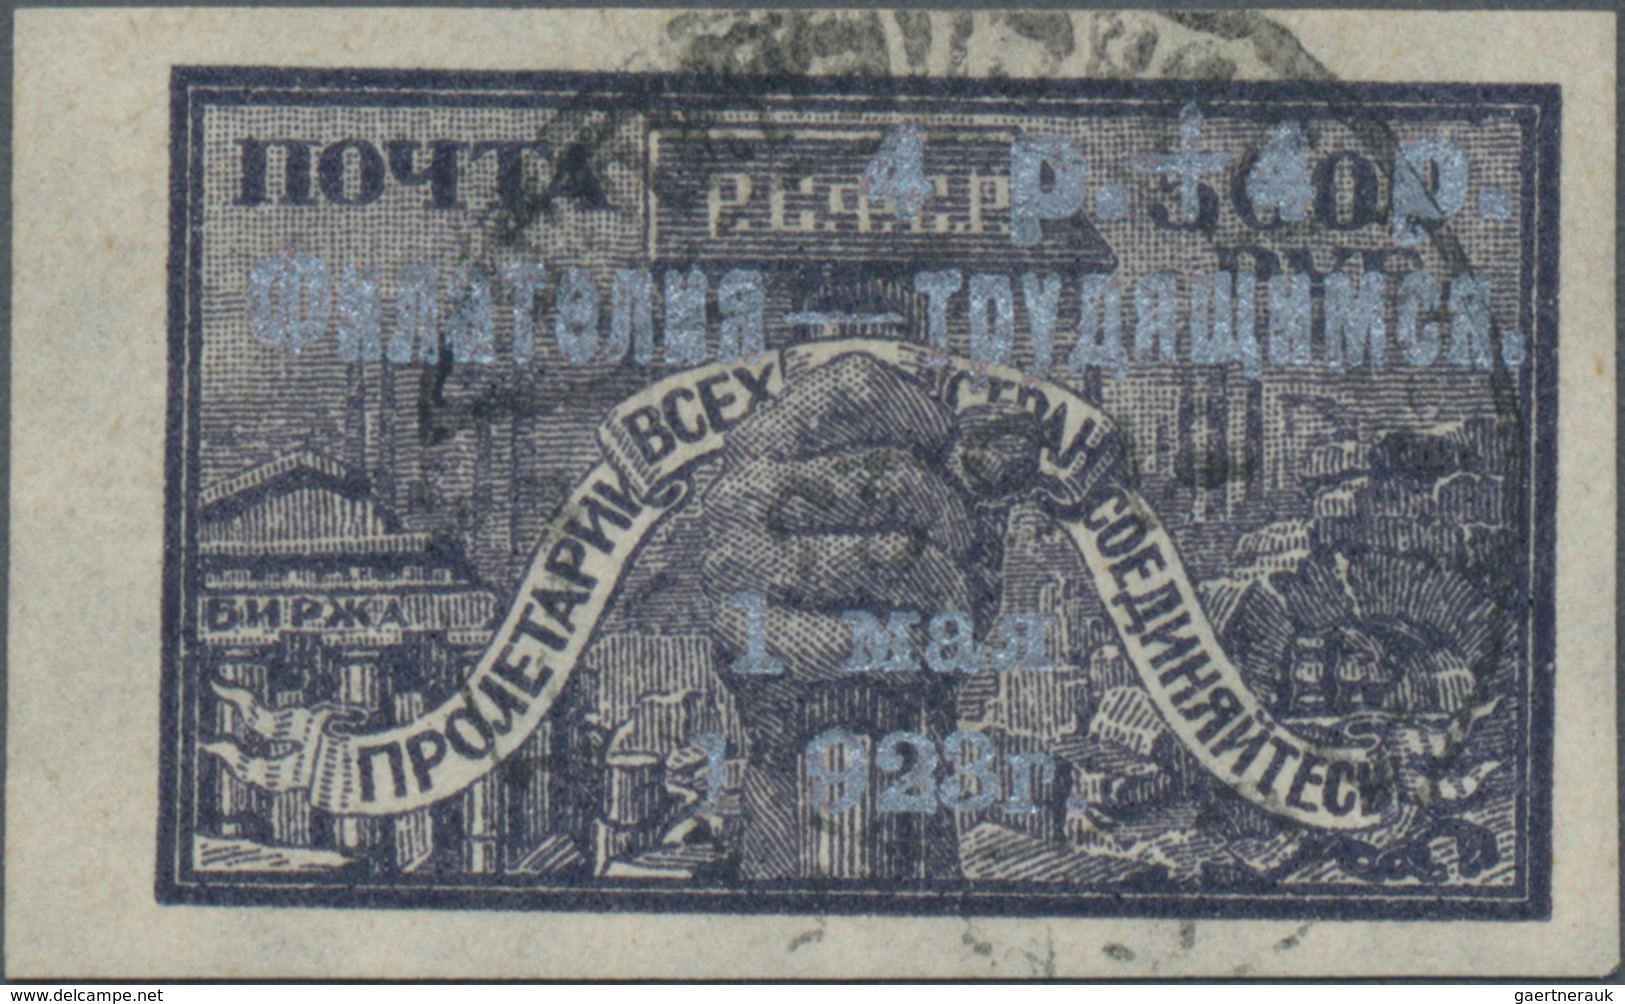 Russland: 1923 'Philately For Labor' Issue "4p.+4p." On 5000r. Violet, SPACED YEAR DATE "1 923" (for - Gebraucht